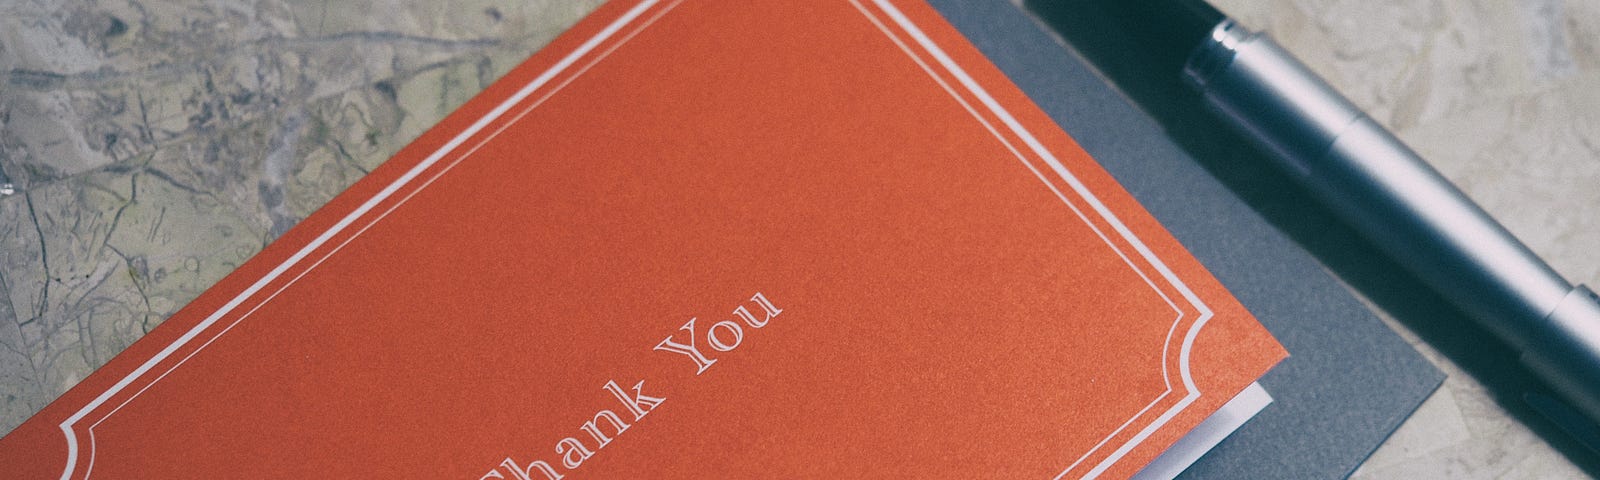 A formal card with Thank You printed on the cover, next to a fountain pen. This will soon be a thank you letter.